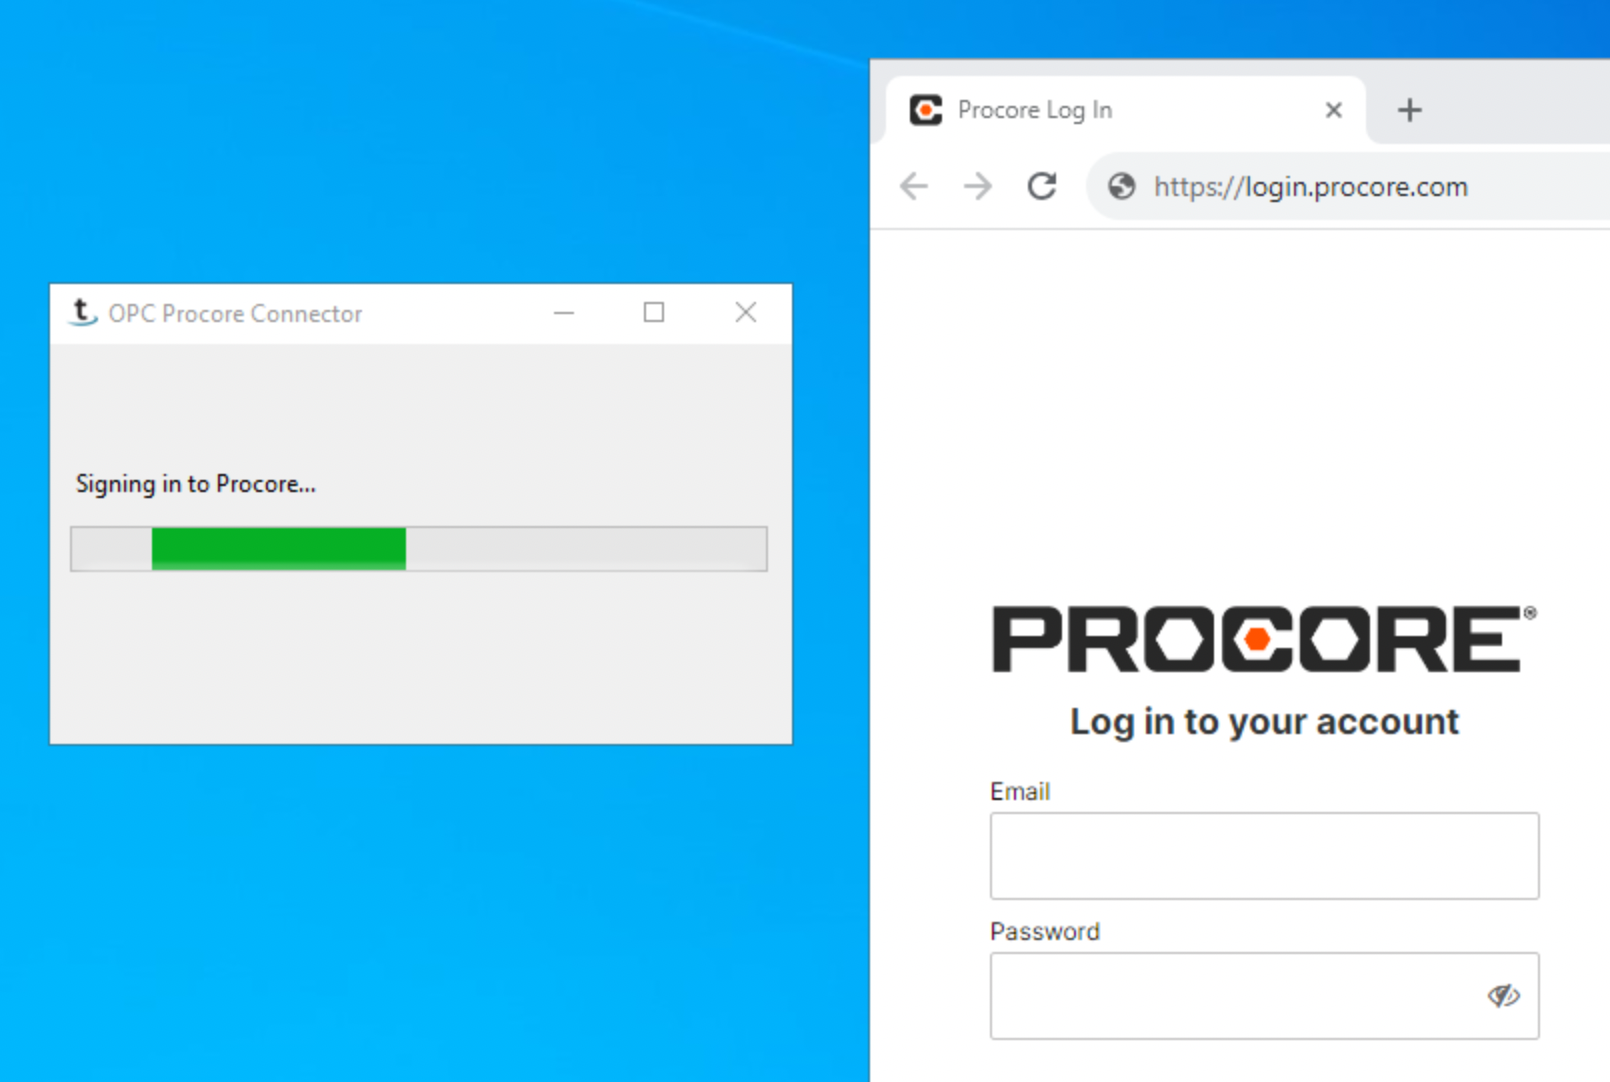 Procore login page in a web browser